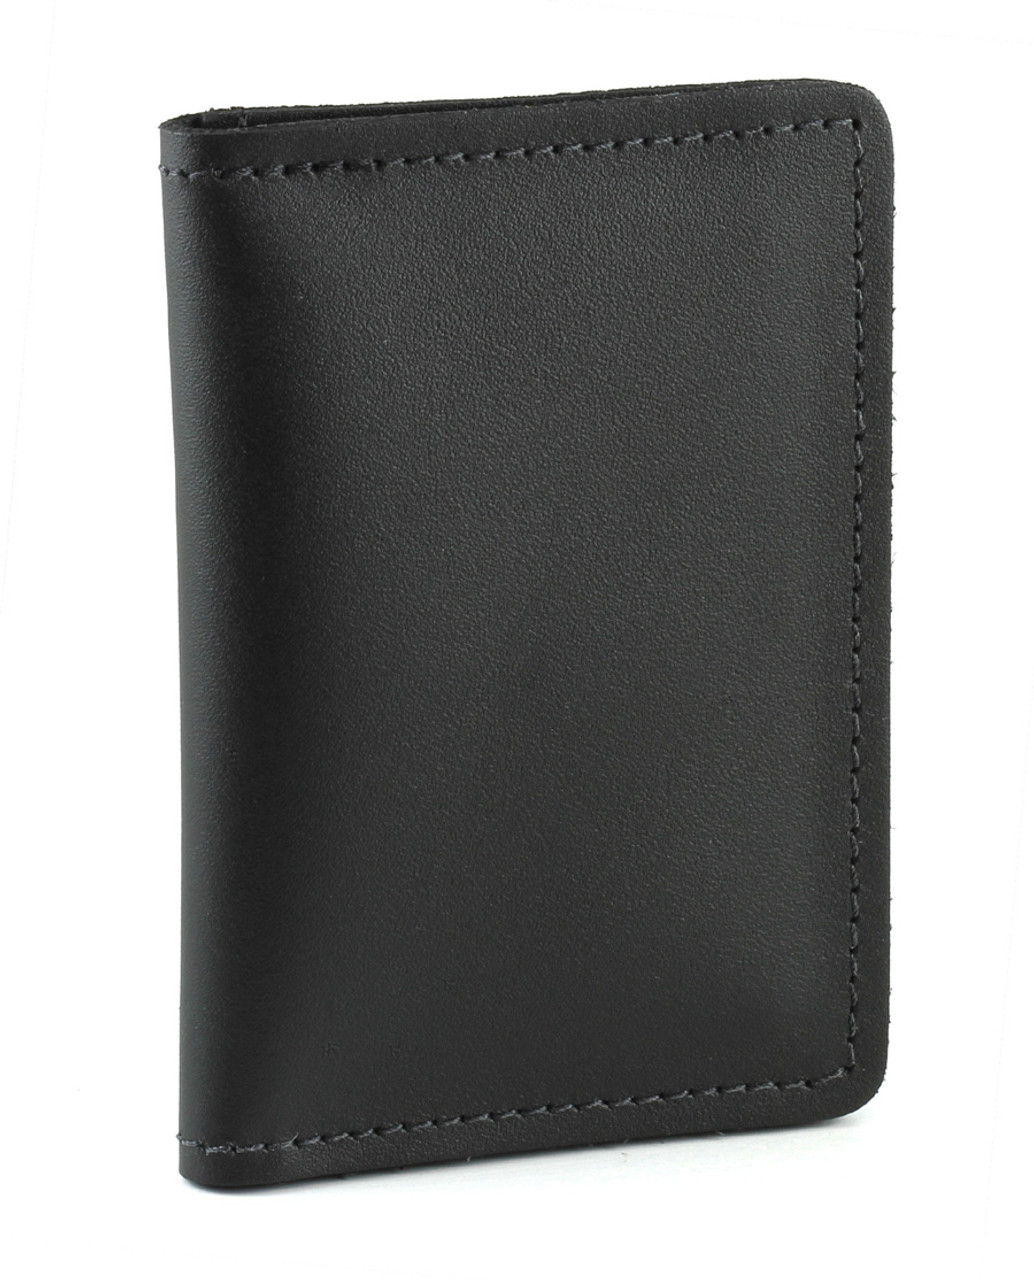 Double ID Wallet Made in USA by Hardy